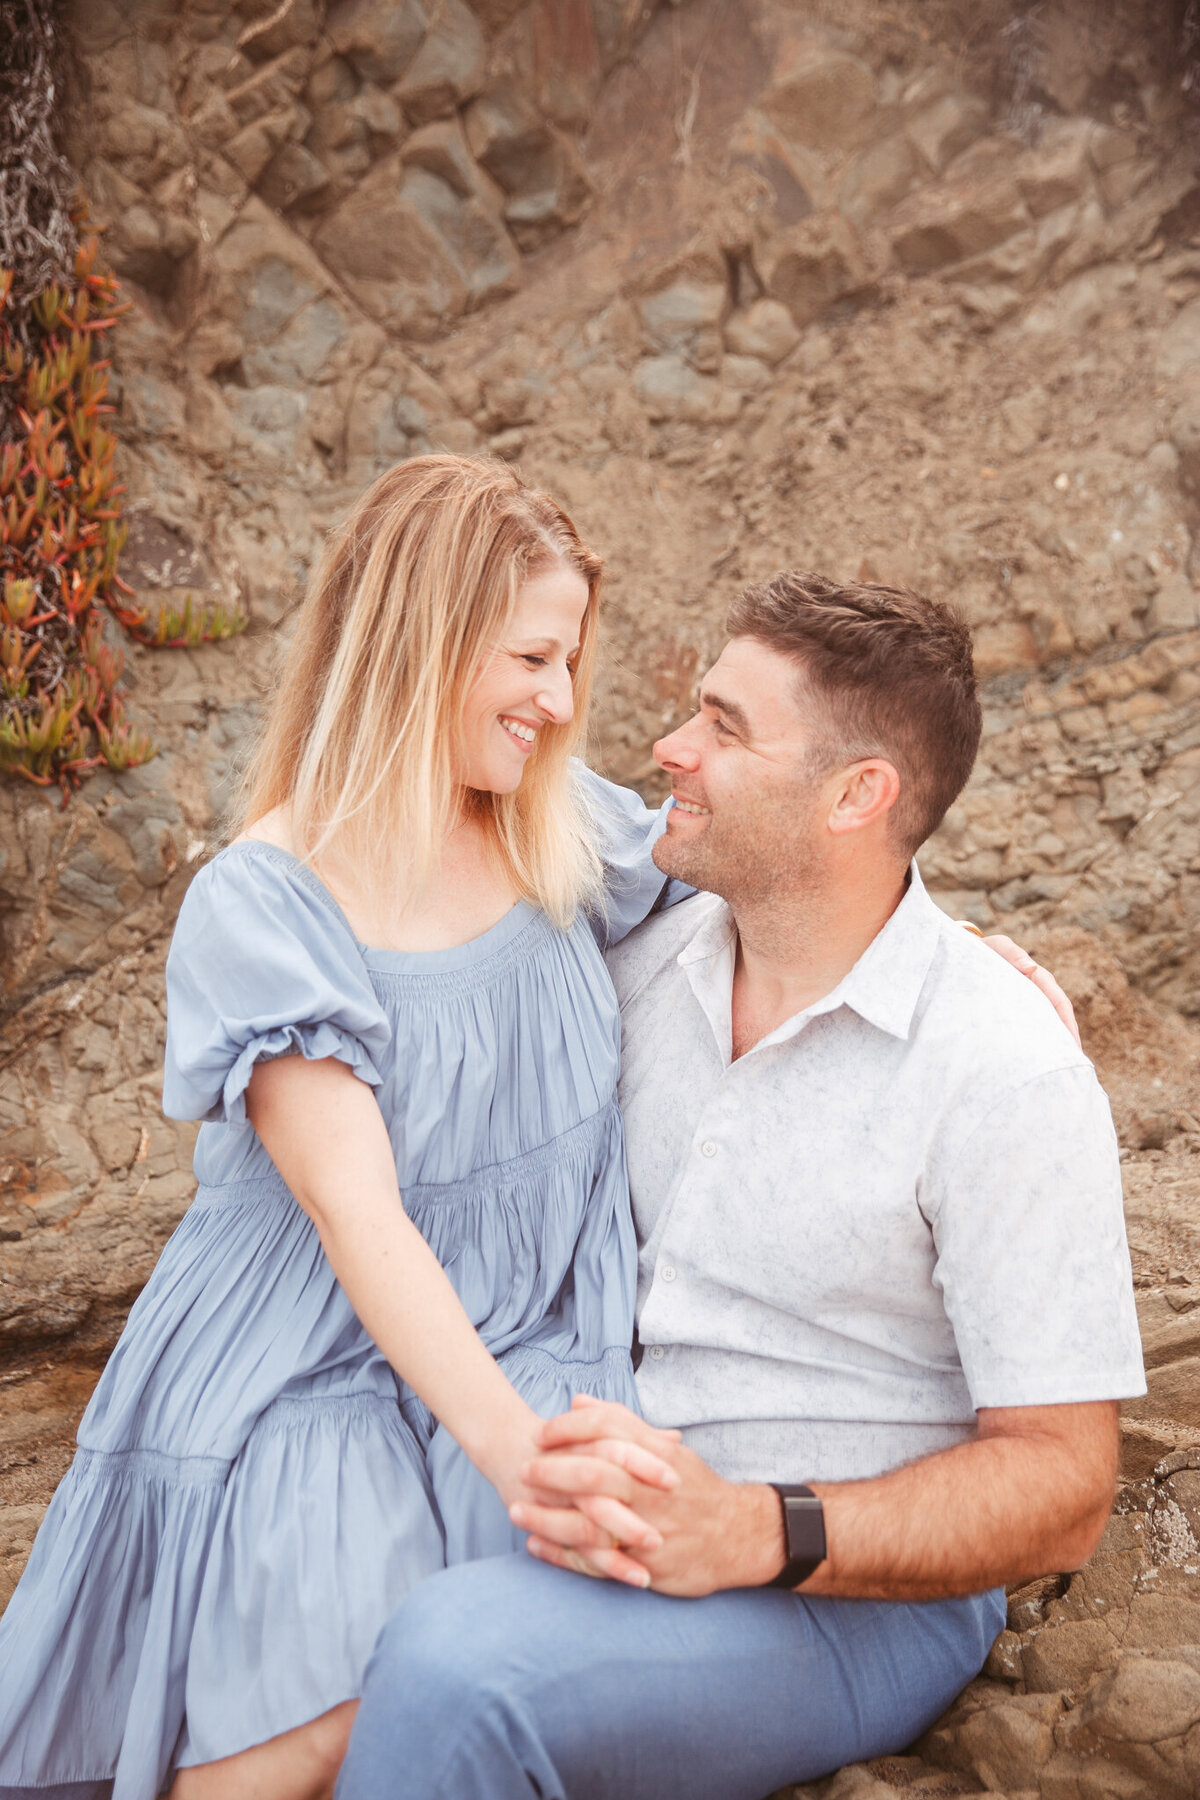 Luke and Leigh Huther-Flytographer-10 Year Anniversary-Baker Beach-San Francisco-Emily Pillon Photography-S-051222-18